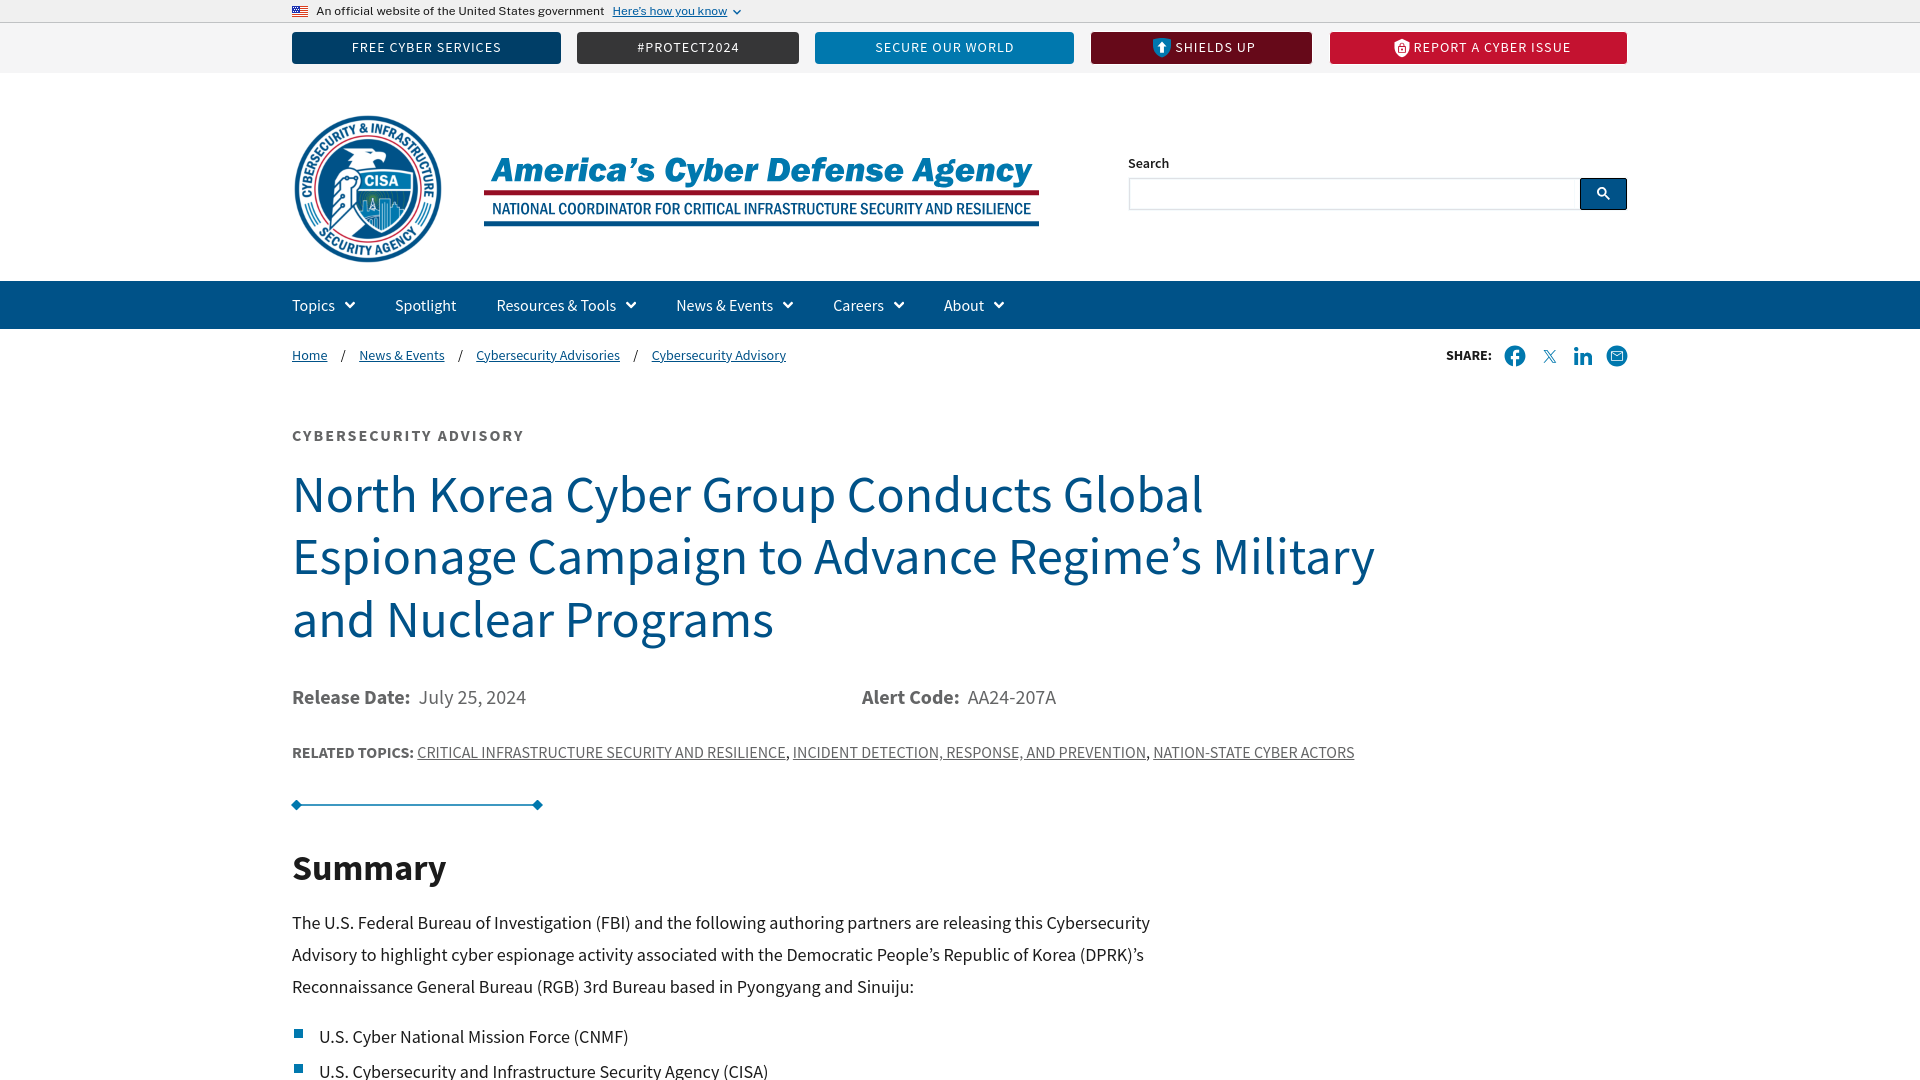 North Korea Cyber Group Conducts Global Espionage Campaign to Advance Regime’s Military and Nuclear Programs | CISA